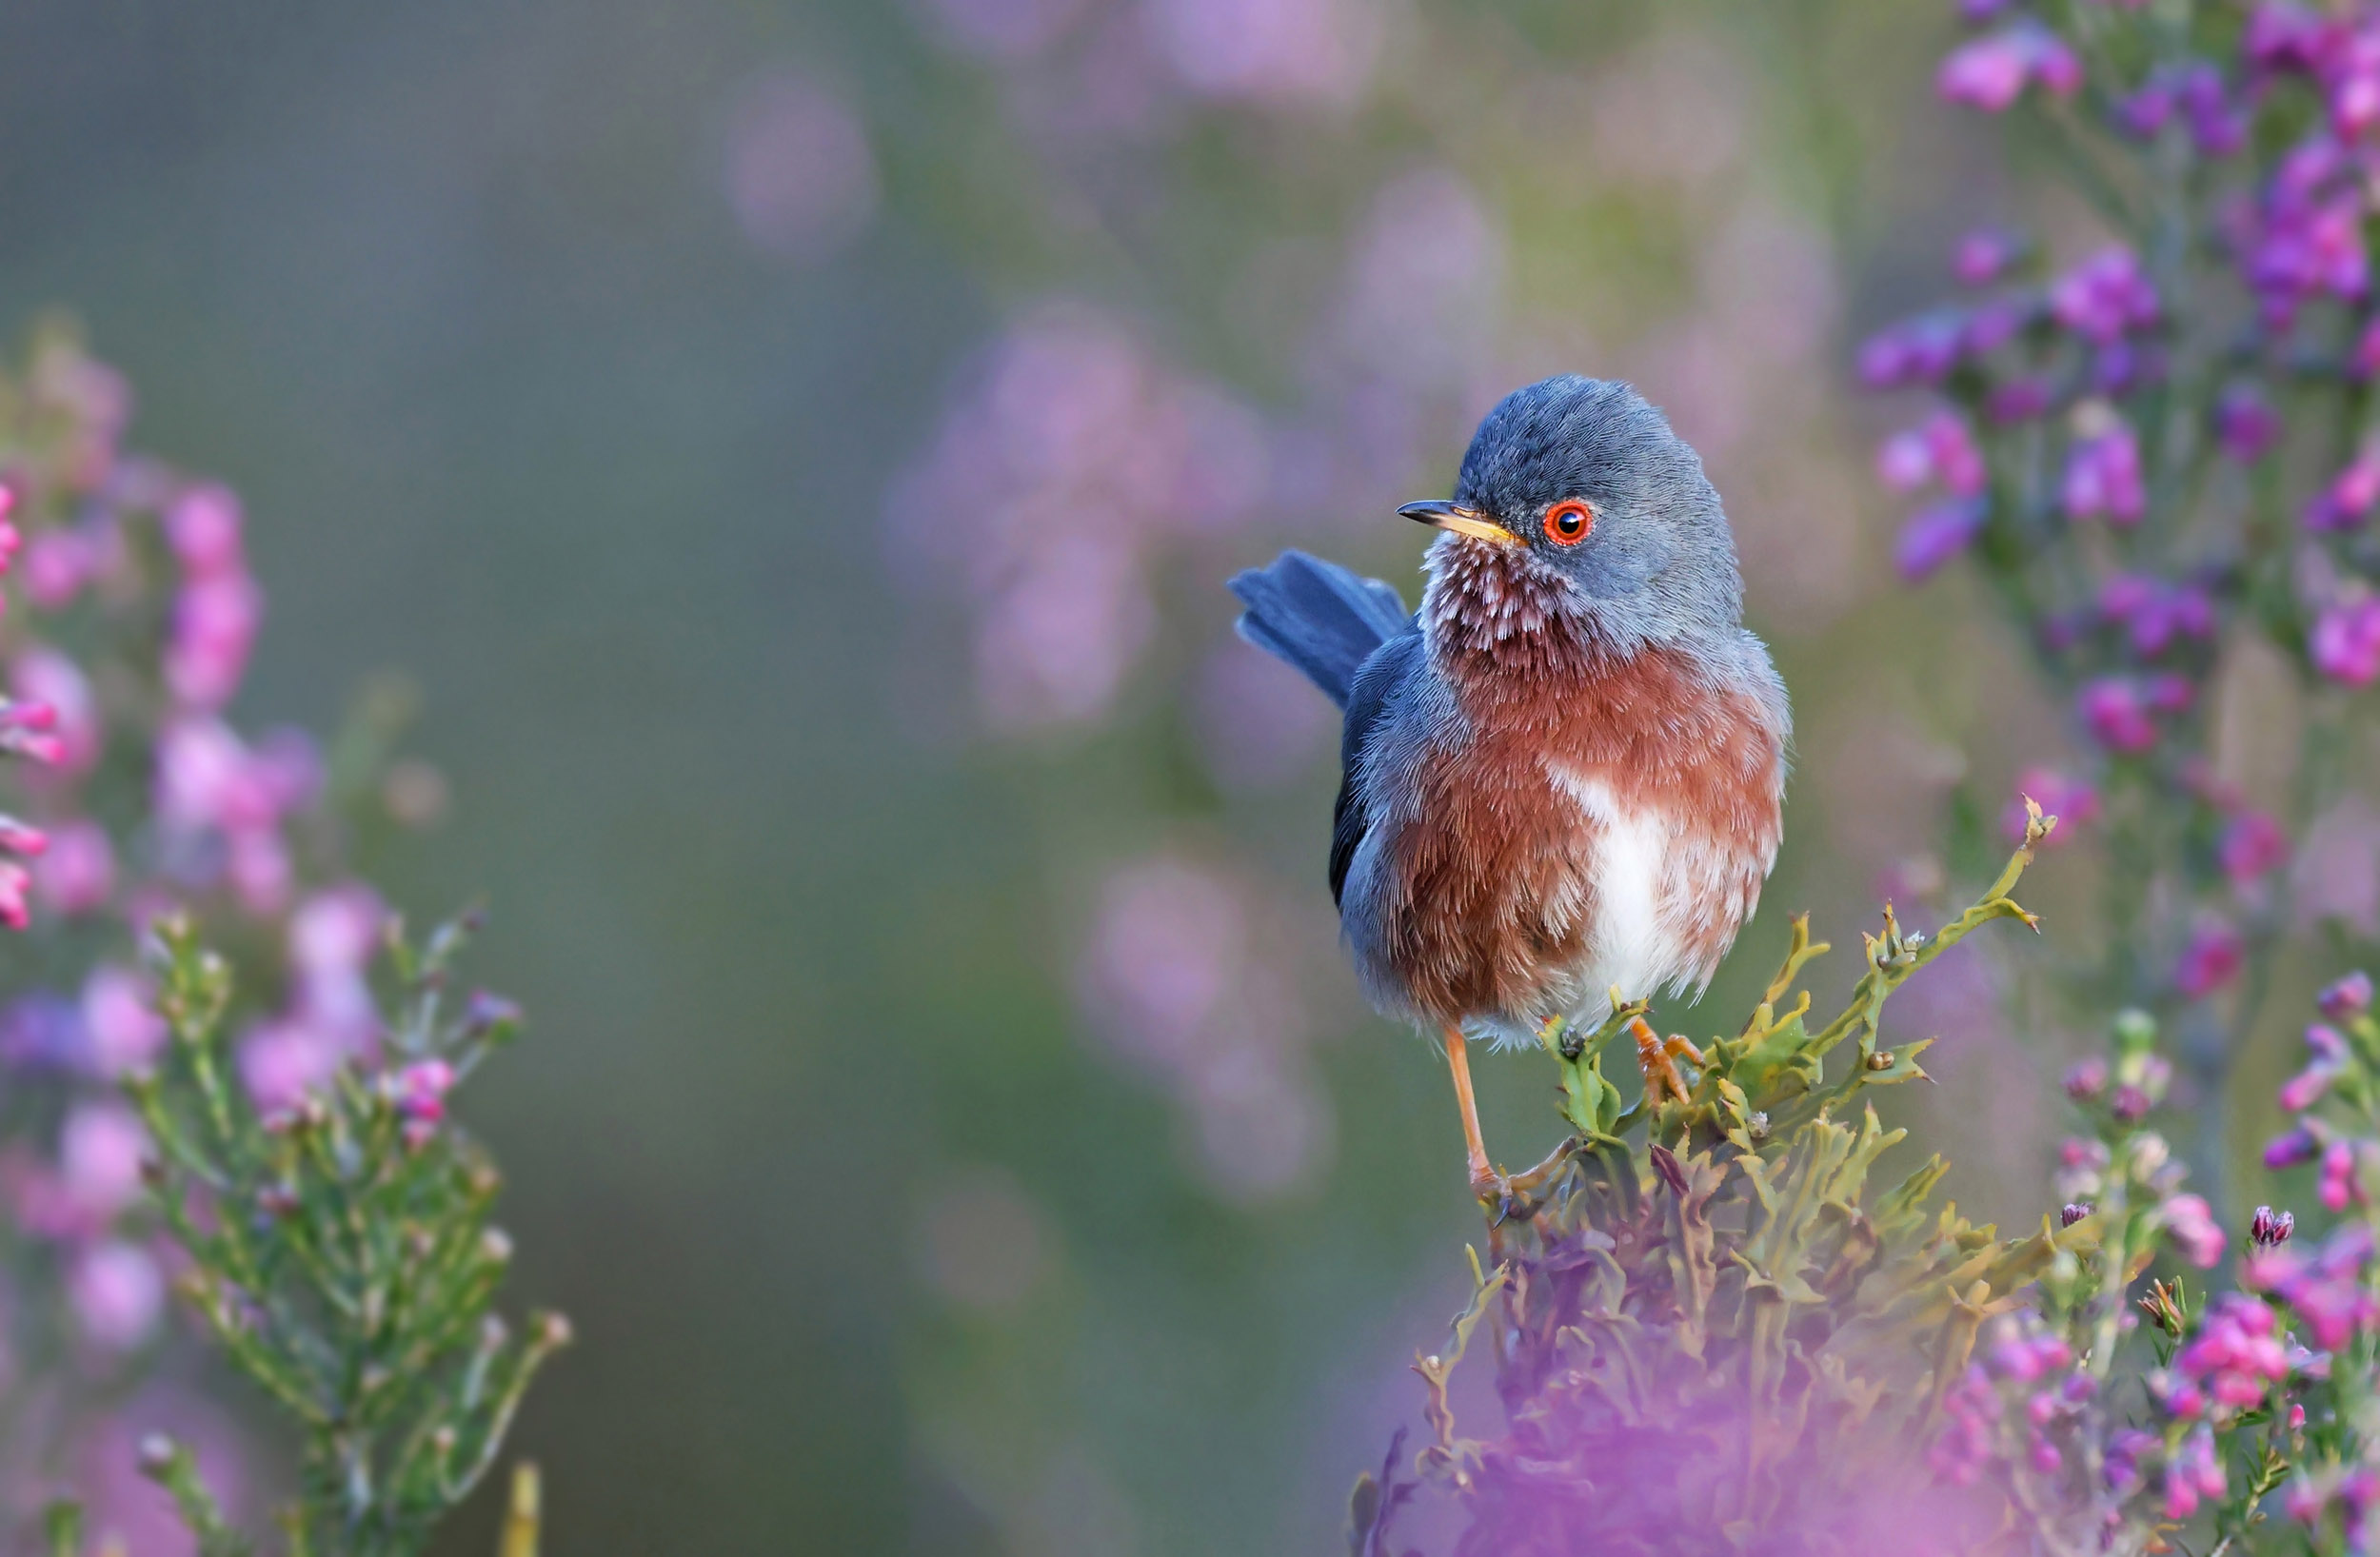 A Dartford Warbler perched on the top of pink flowers.